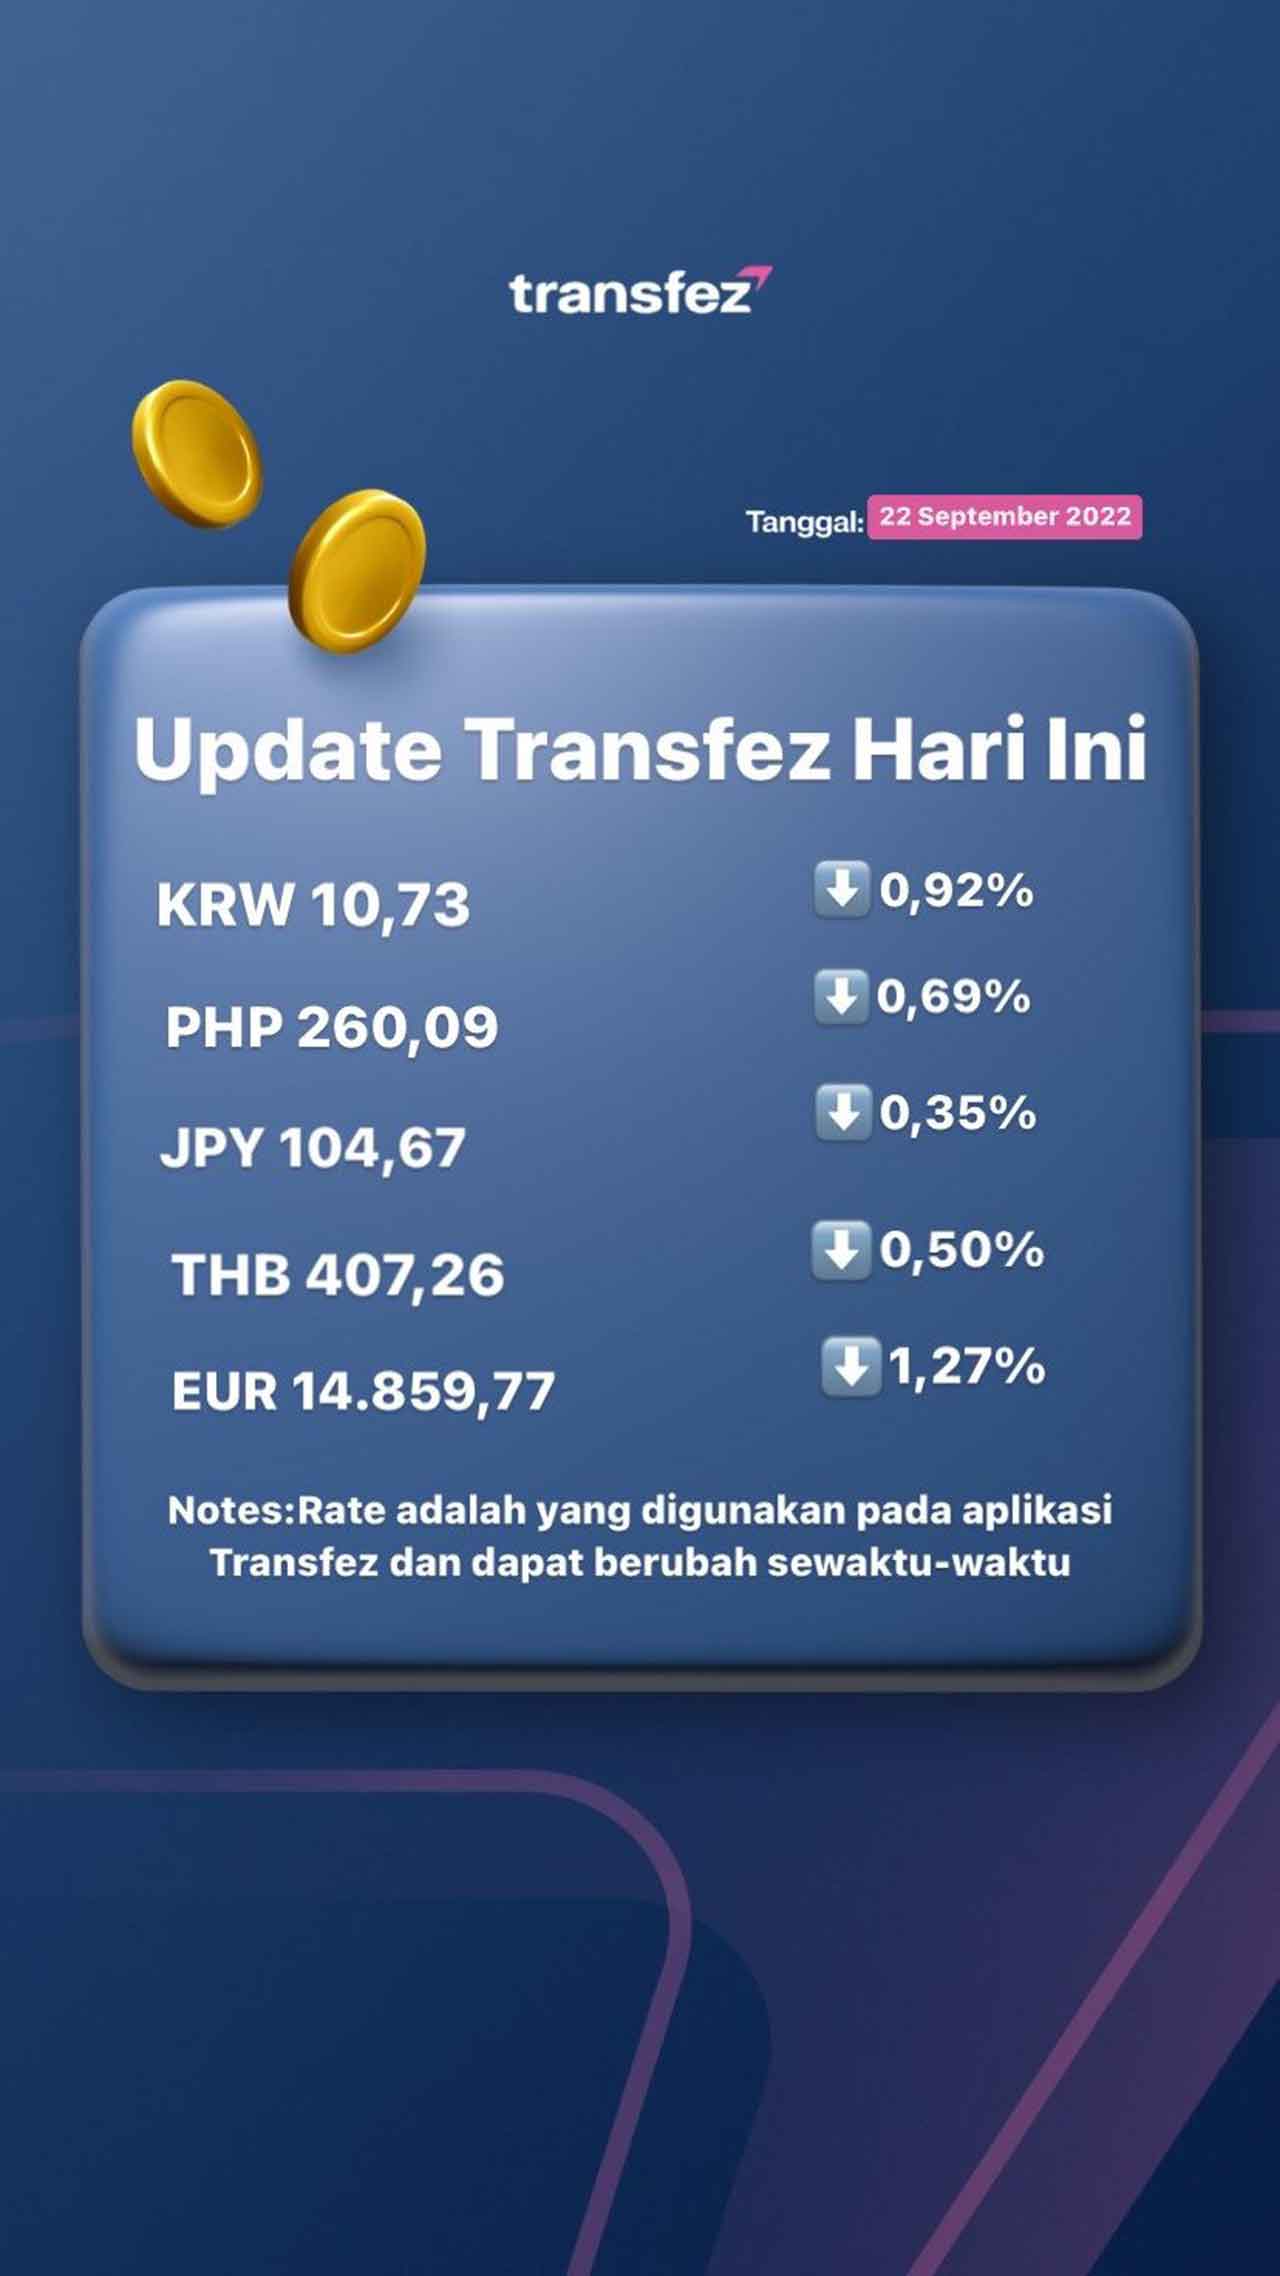 Today's Transfer Rate Update 22 September 2022